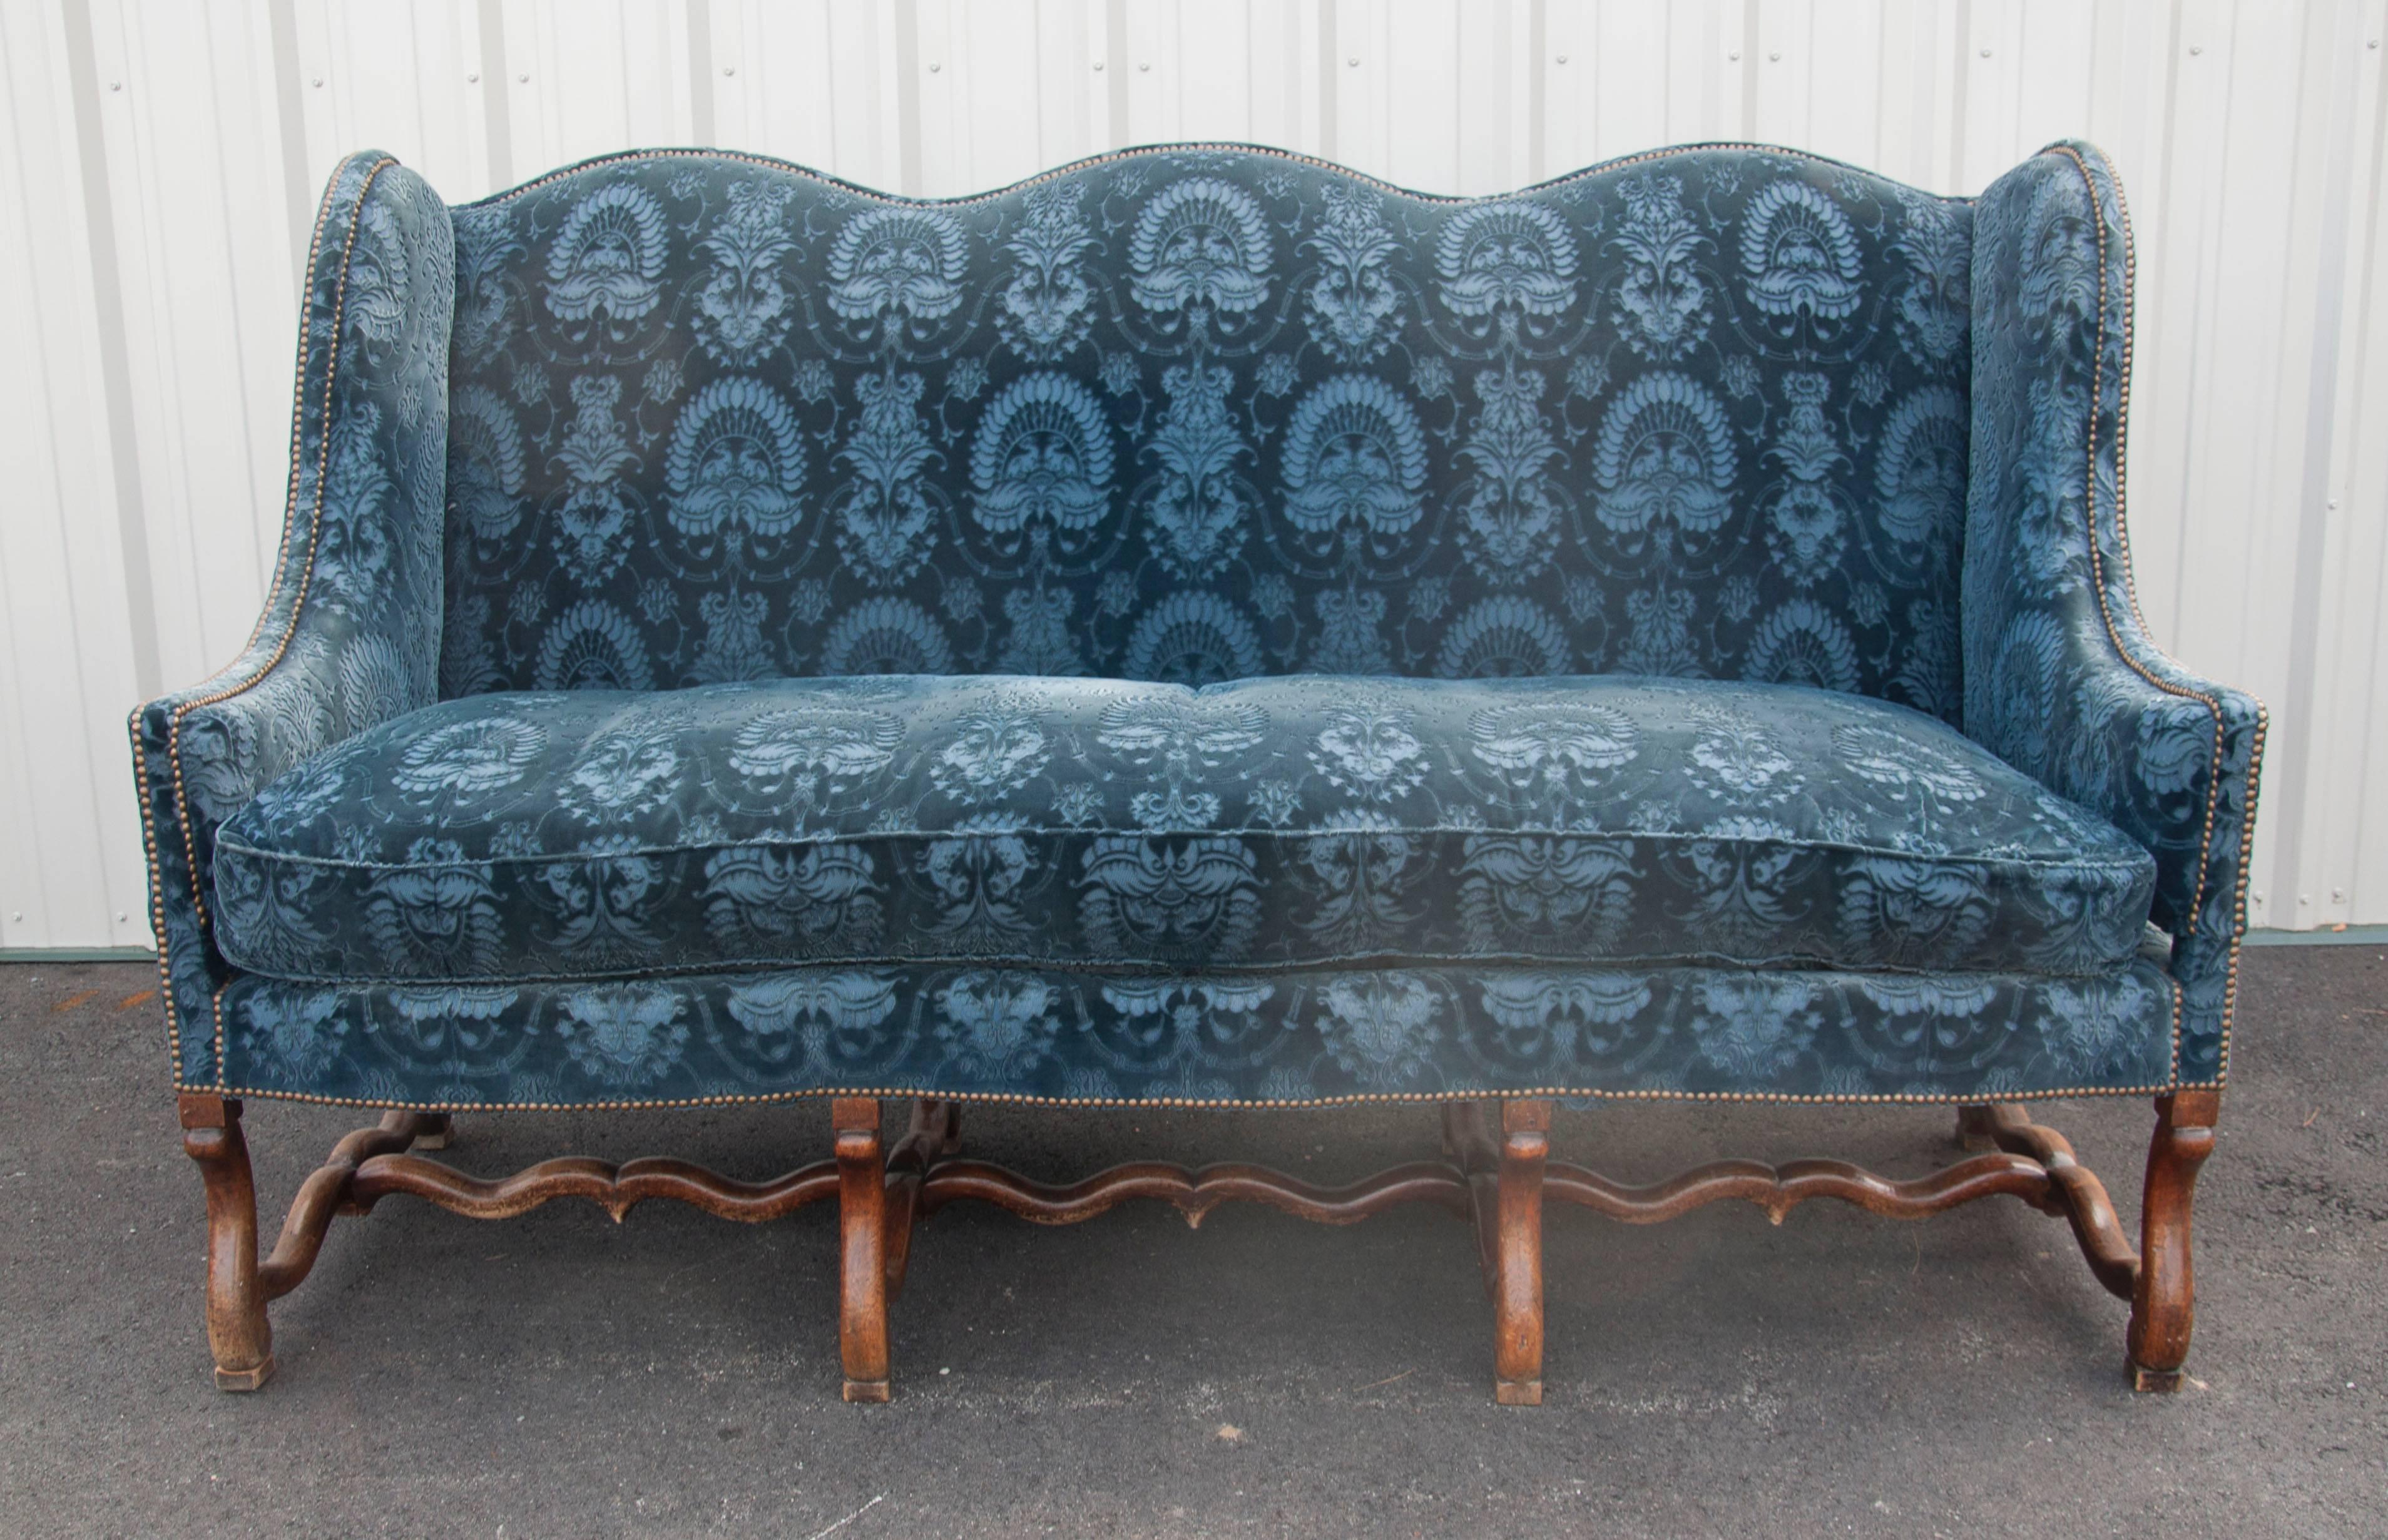 Extremely generous proportions with serpentine back and conforming seat with down filled cushion , S curved legs joined by stretchers. Upholstered in rich blue cut velvet with brass tacks. From Dallas Texas estate.